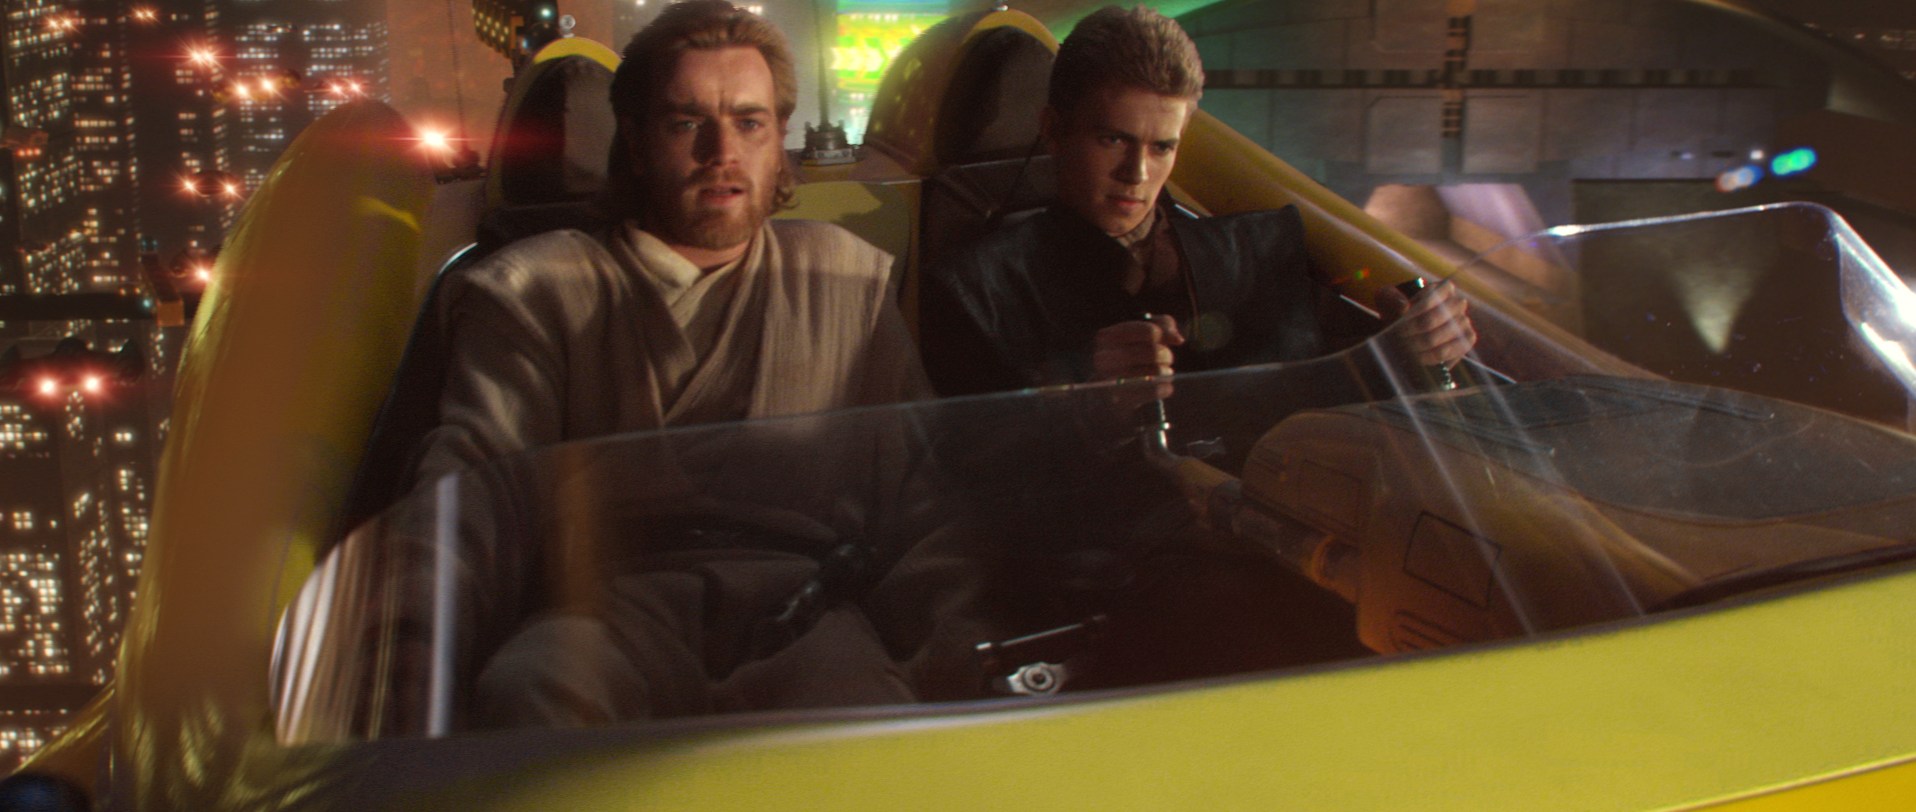 http://img2.wikia.nocookie.net/__cb20090918165459/starwars/images/2/23/Attack_of_the_clones_1.jpg